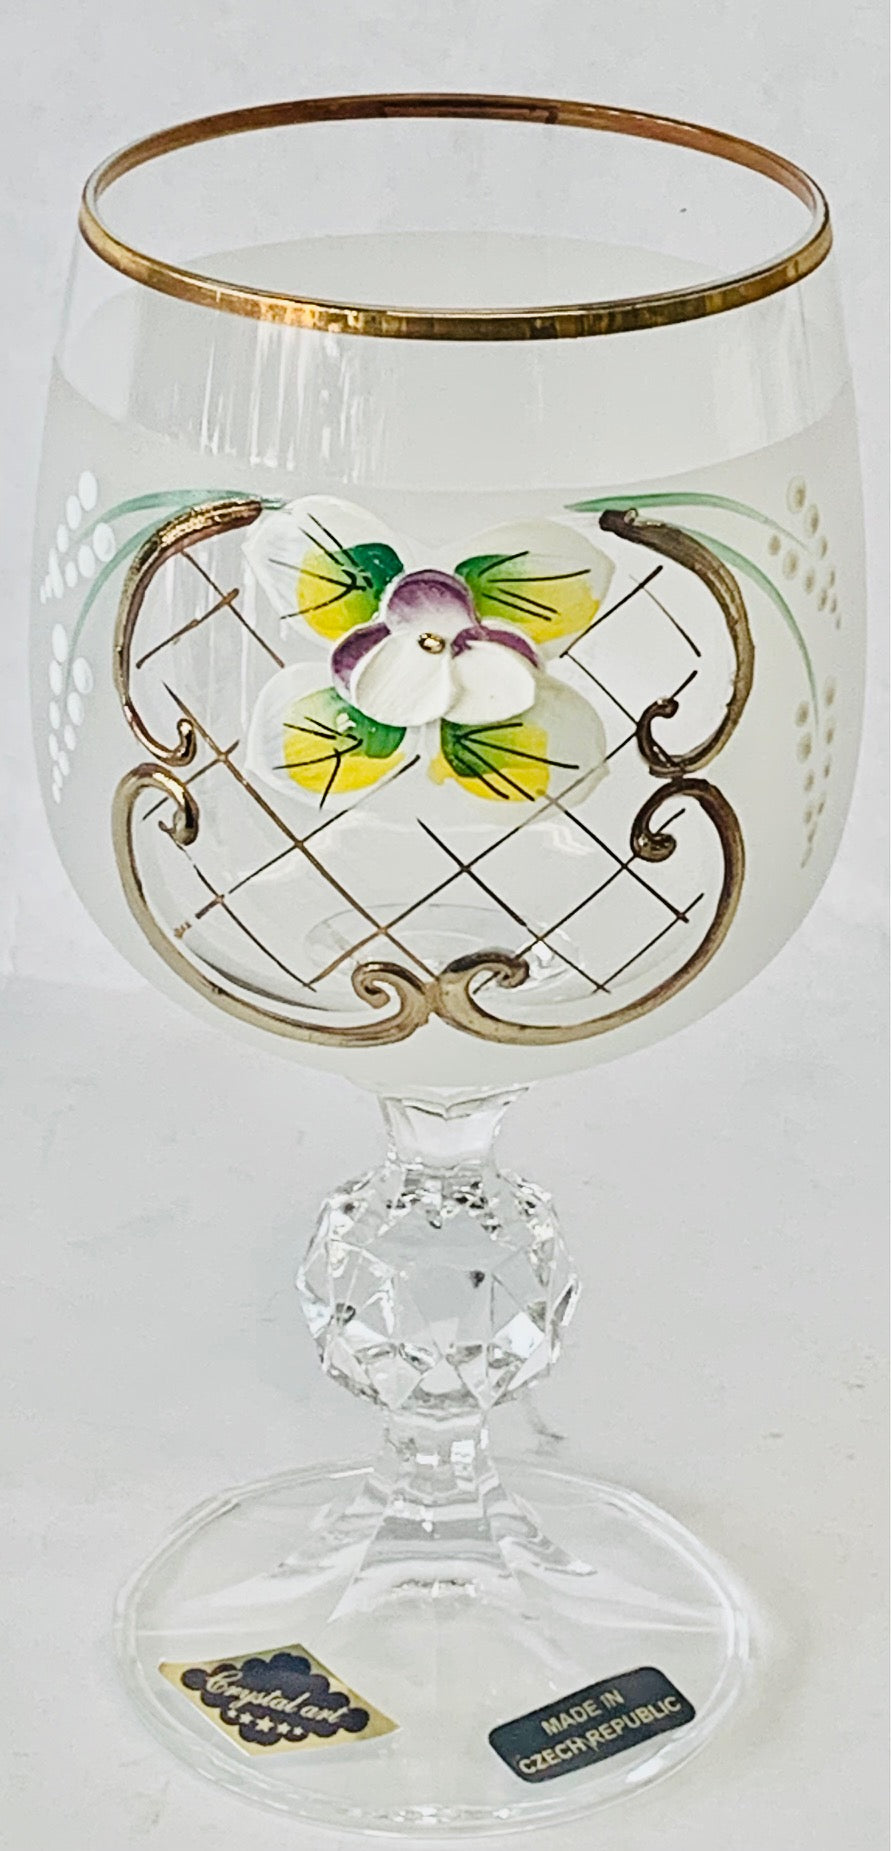 Bohemia Wine Glasses 6-Piece set 6-OZ Each With 3D flowers Made in Czech Republic